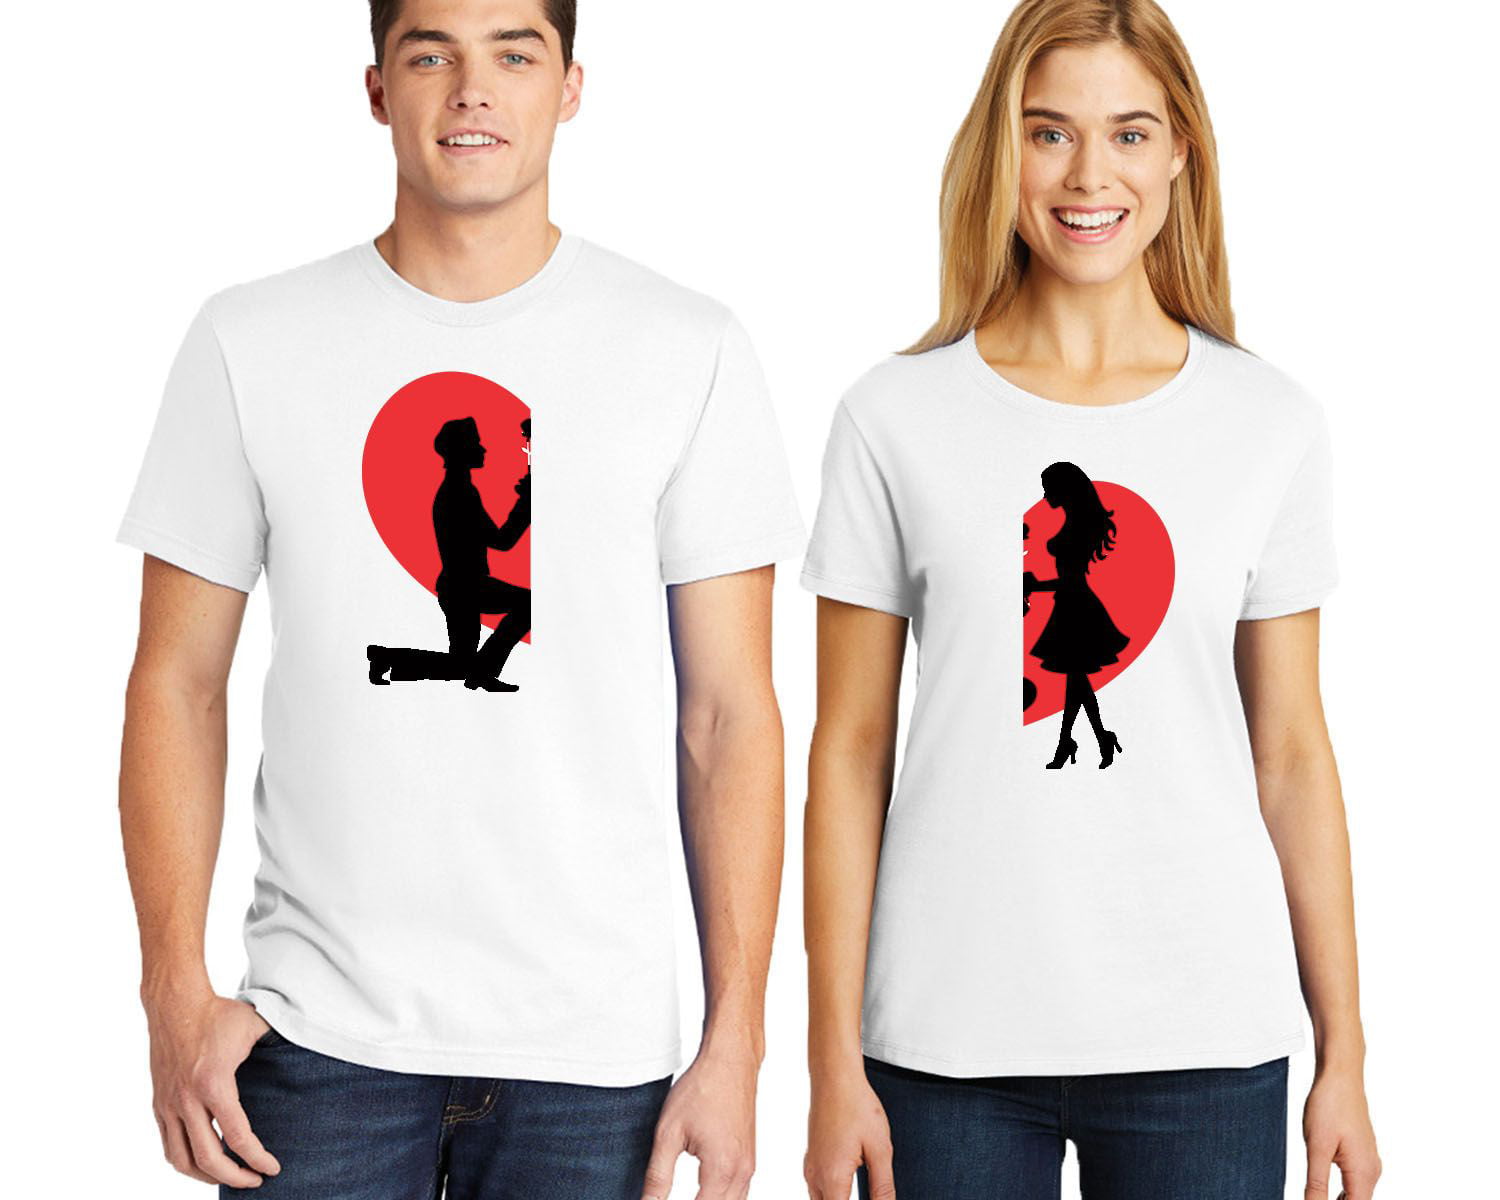 T-shirt printing  Customised T-shirts for men & women with photo